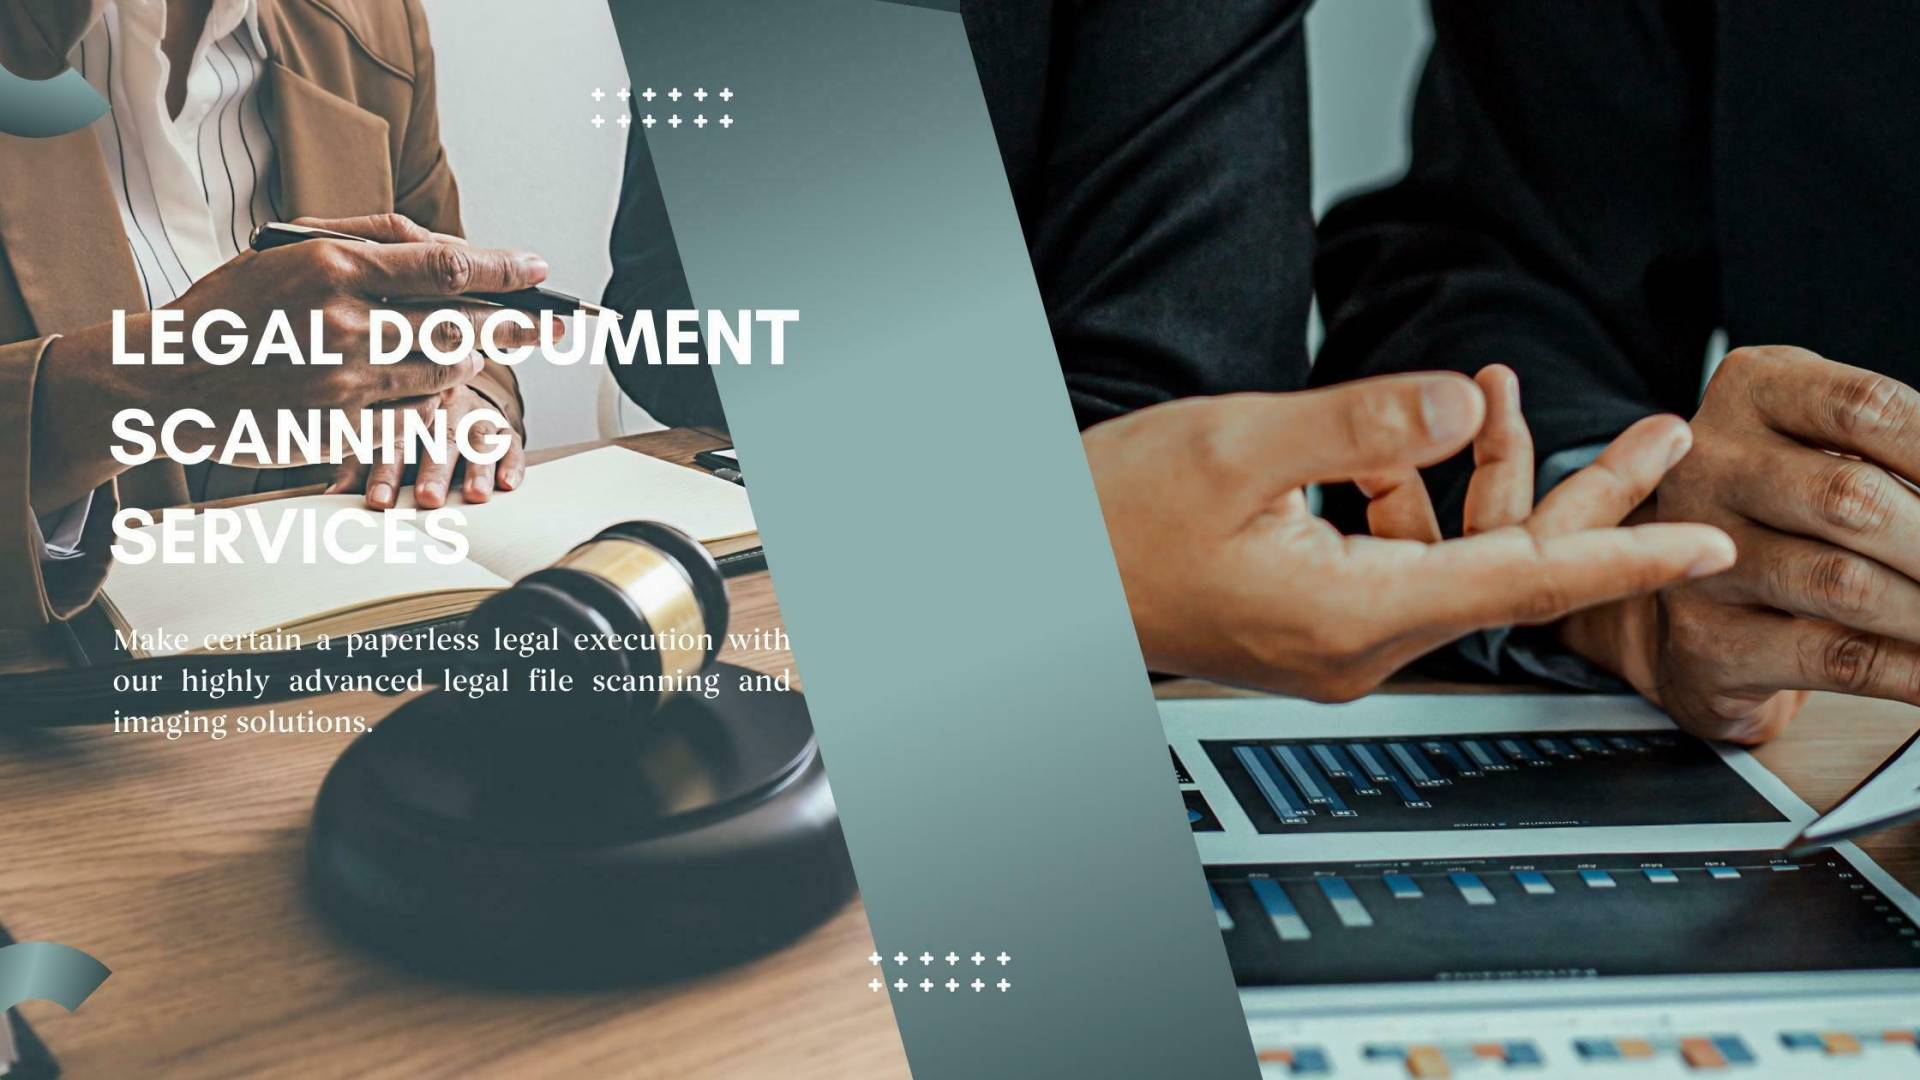 Legal Document Scanning Services